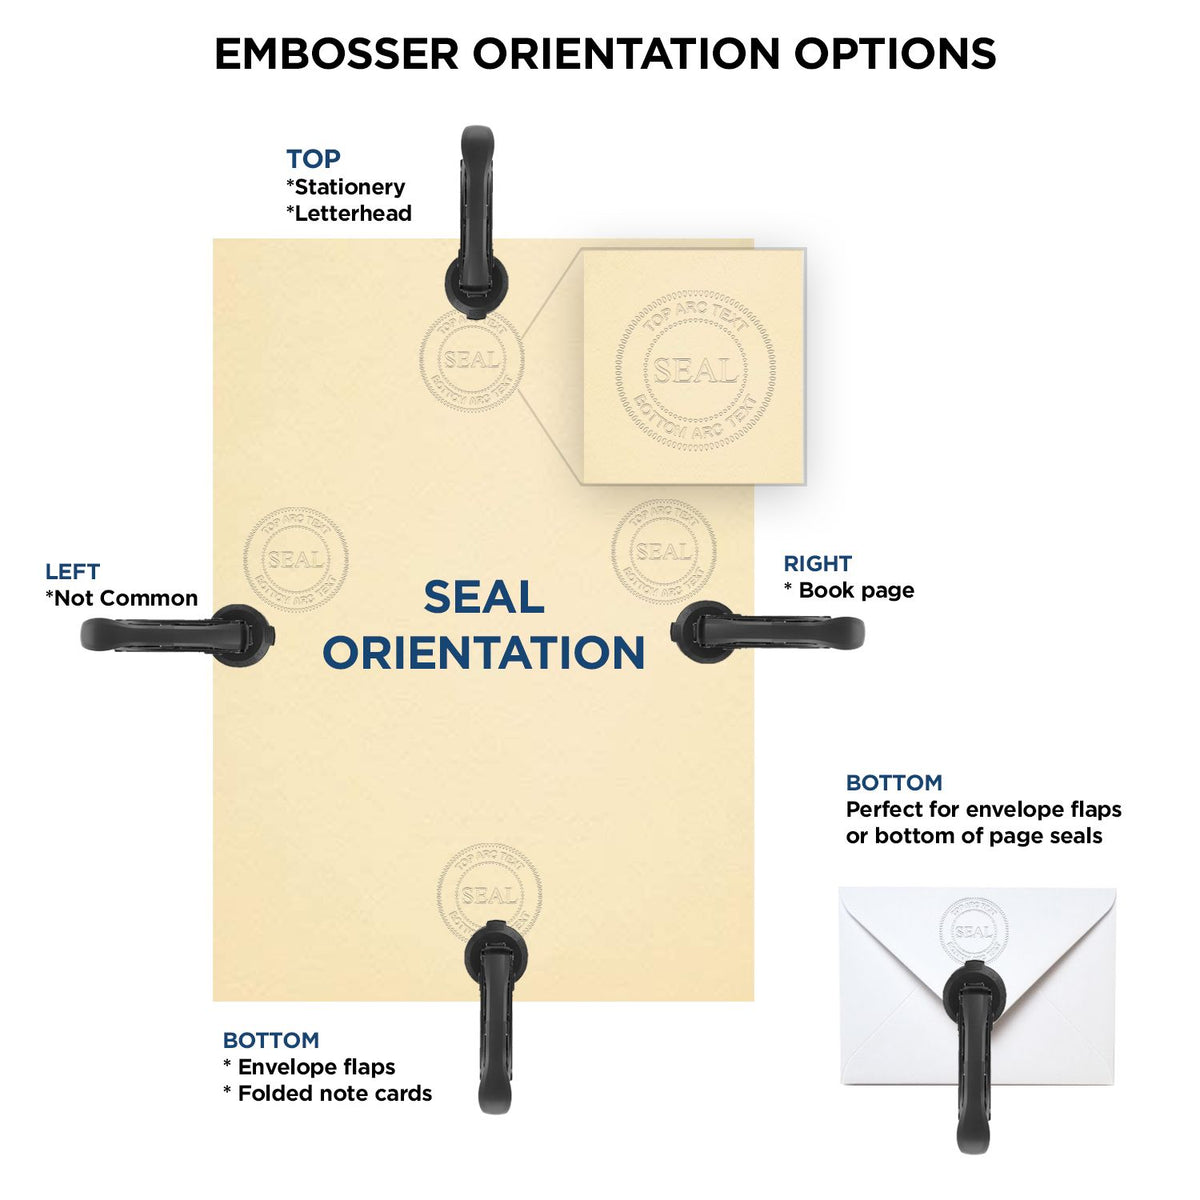 An infographic for the New Hampshire Engineer Desk Seal showing embosser orientation, this is showing examples of a top, bottom, right and left insert.